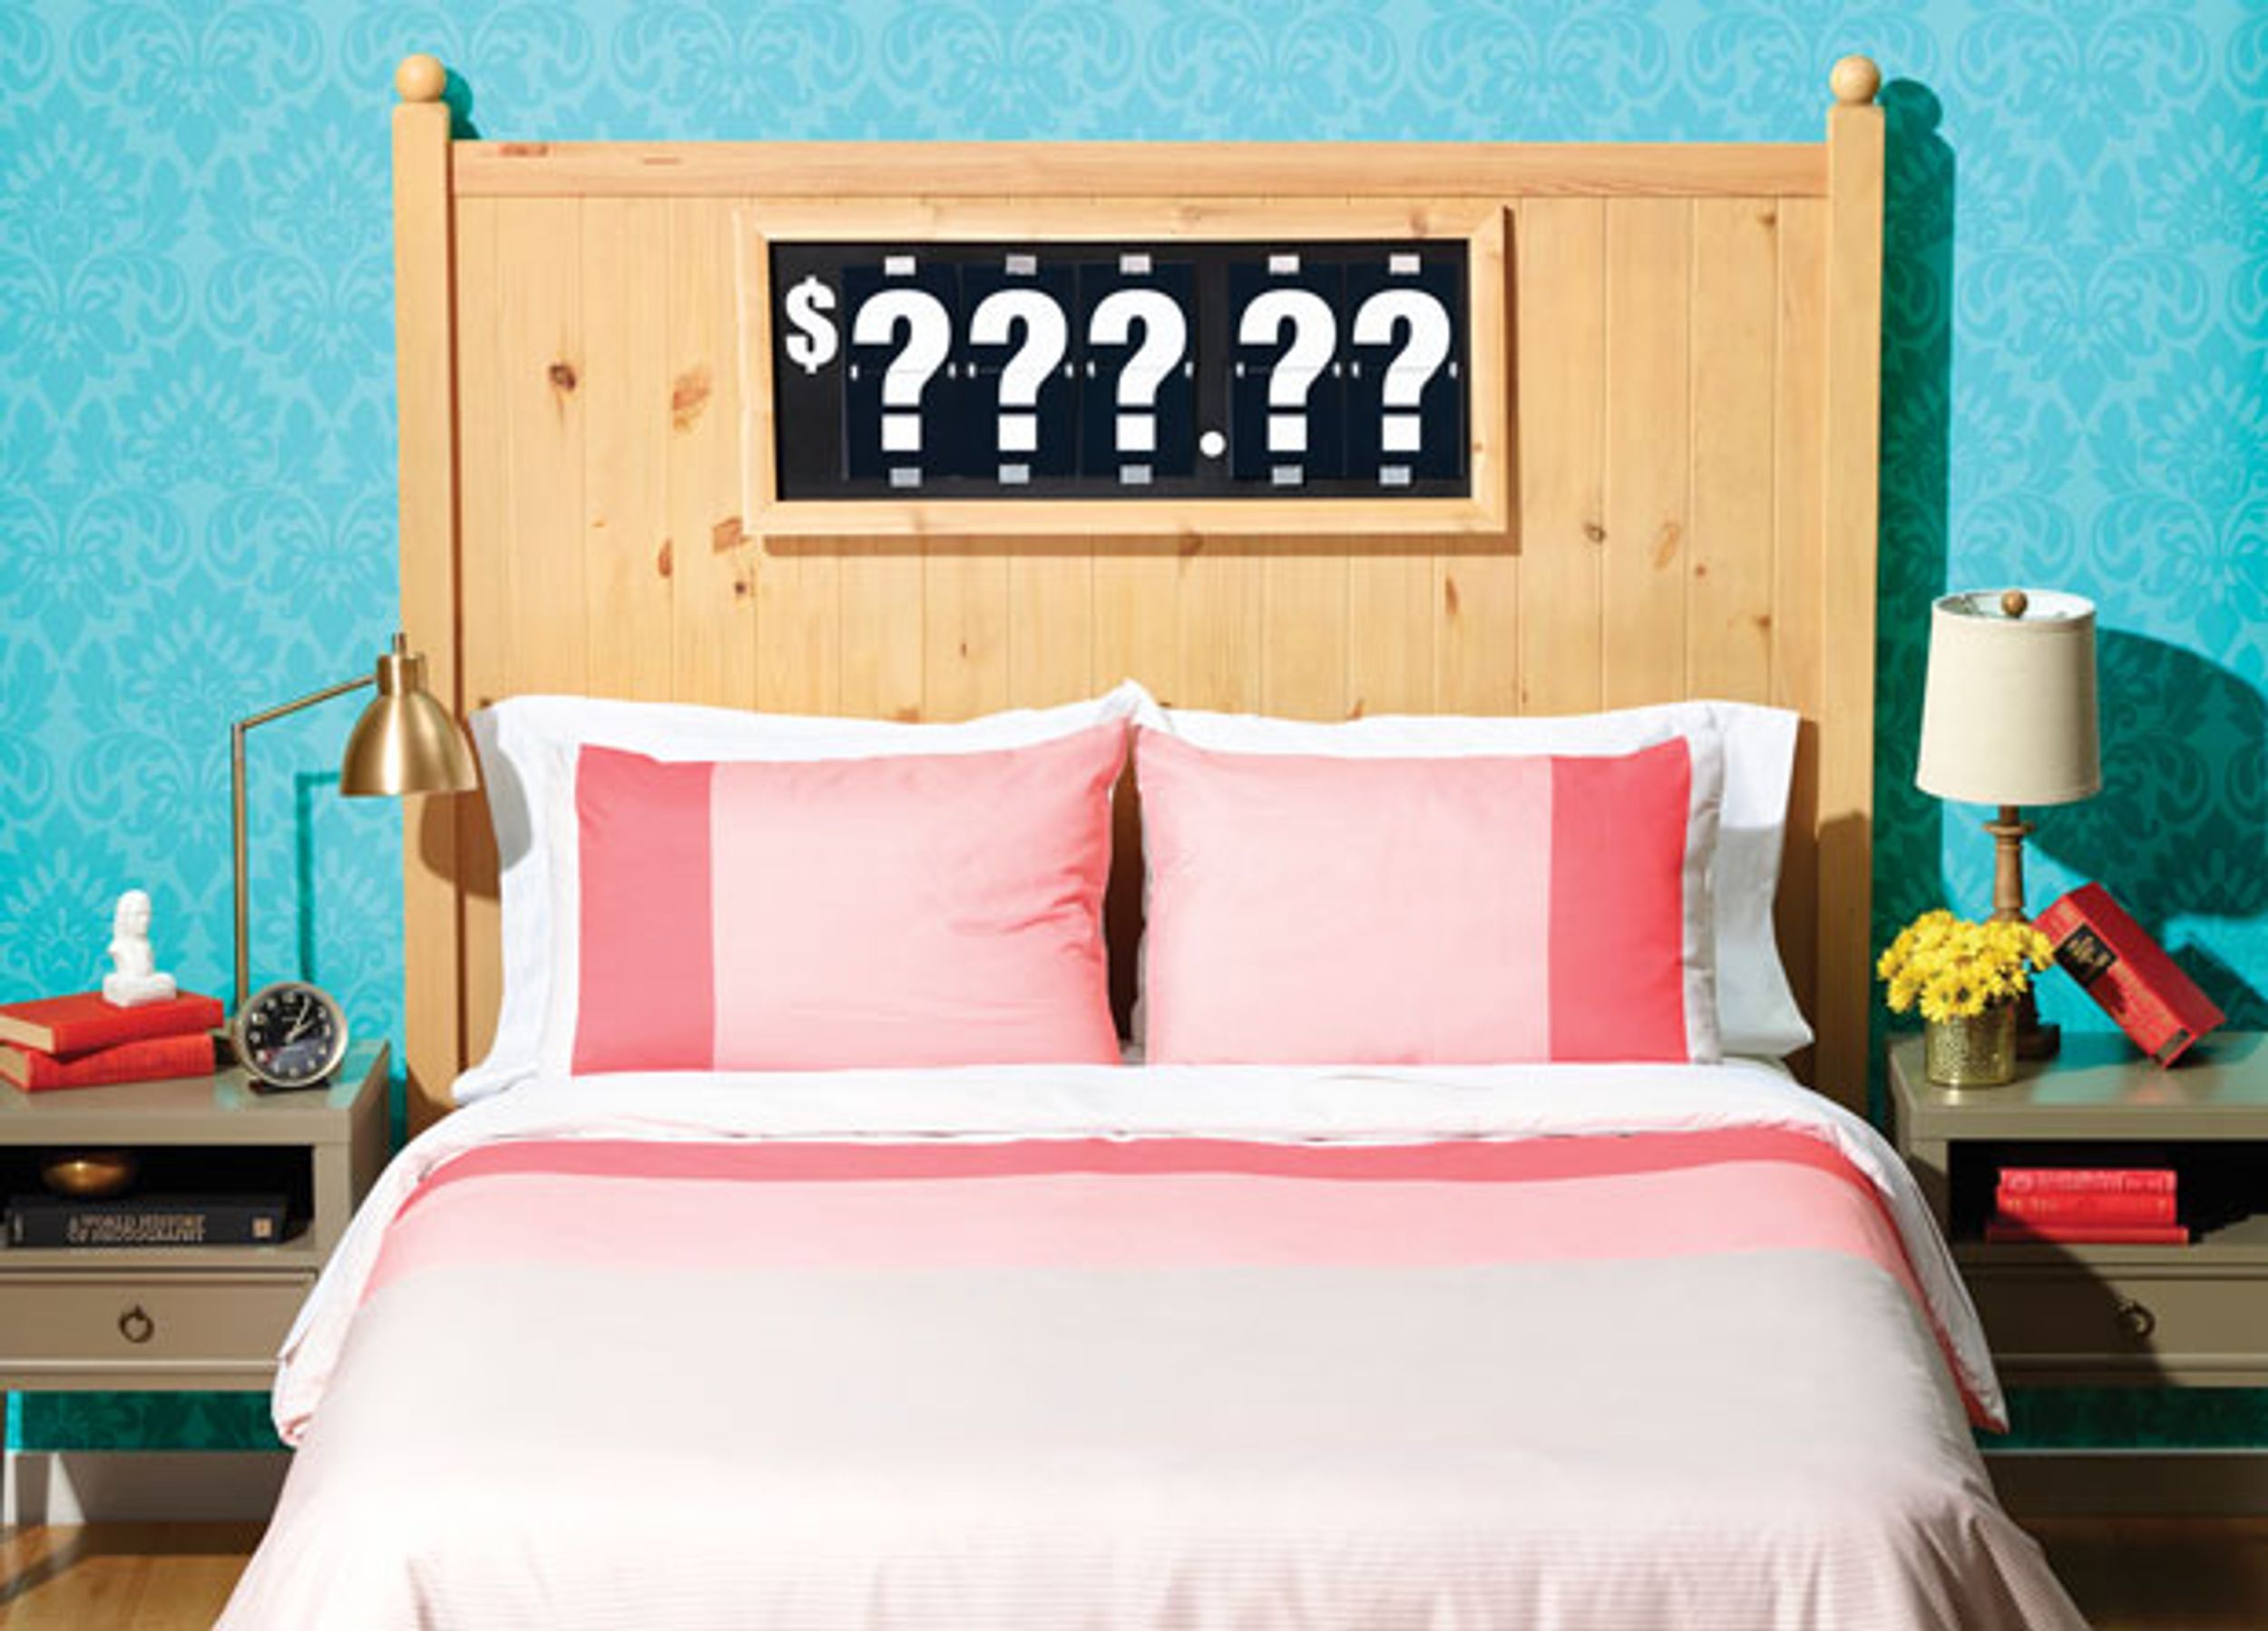 photo of a bed with dollar sign and question marks